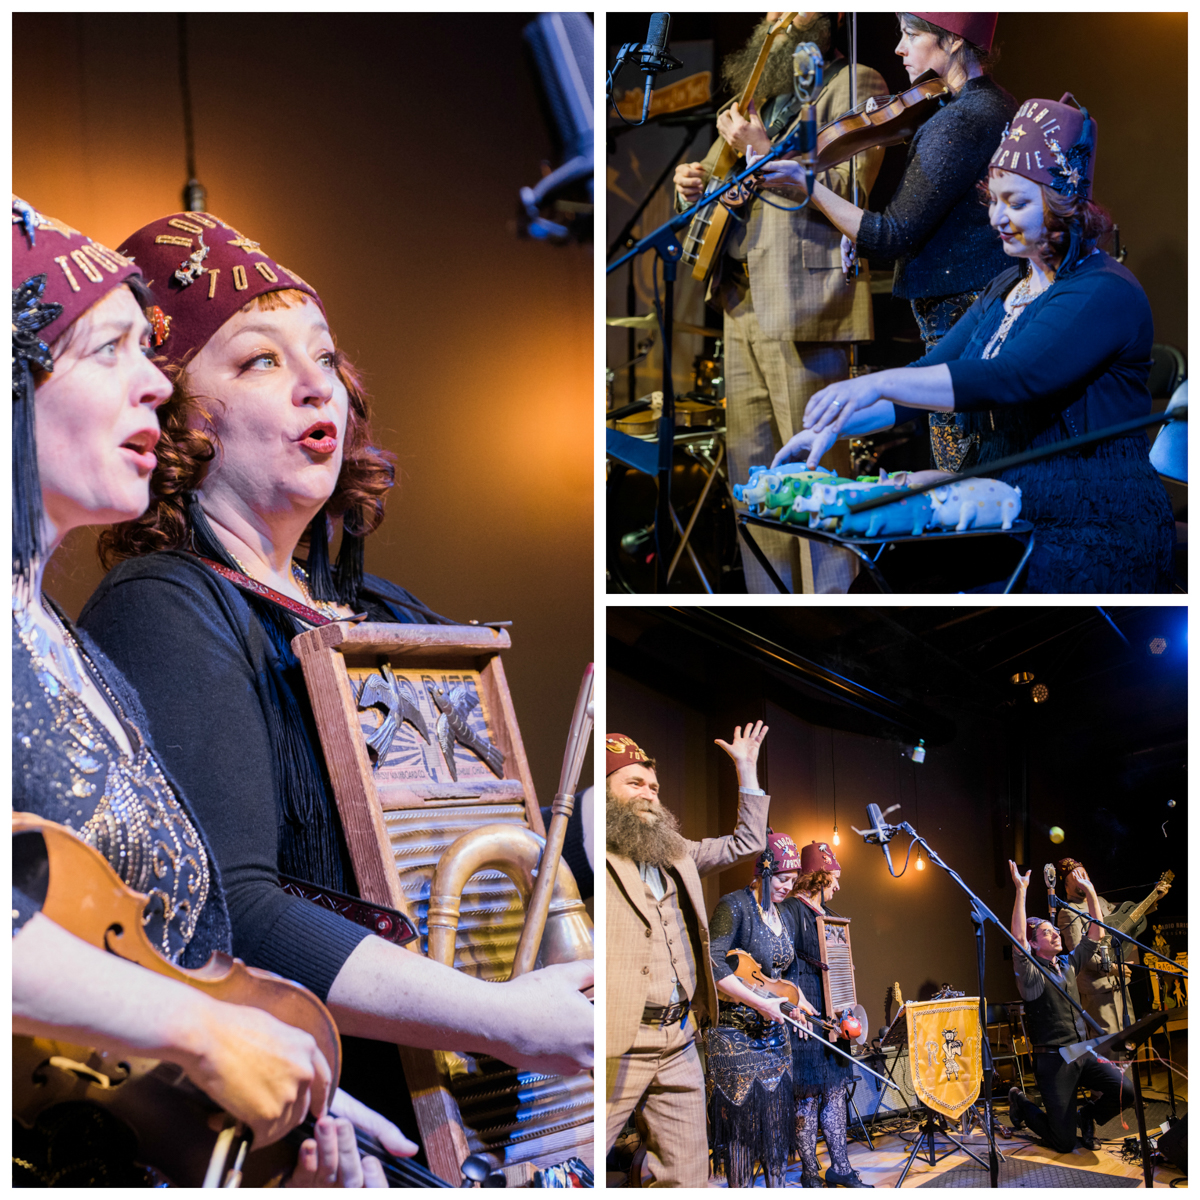 Three images showing the two female singers from Rootchie Tootchie wearing their funny hats and singing; one female Rootchie Tootchie member playing the pork-astra, a variety of squeaking rubber pigs;, and the full band on stage.